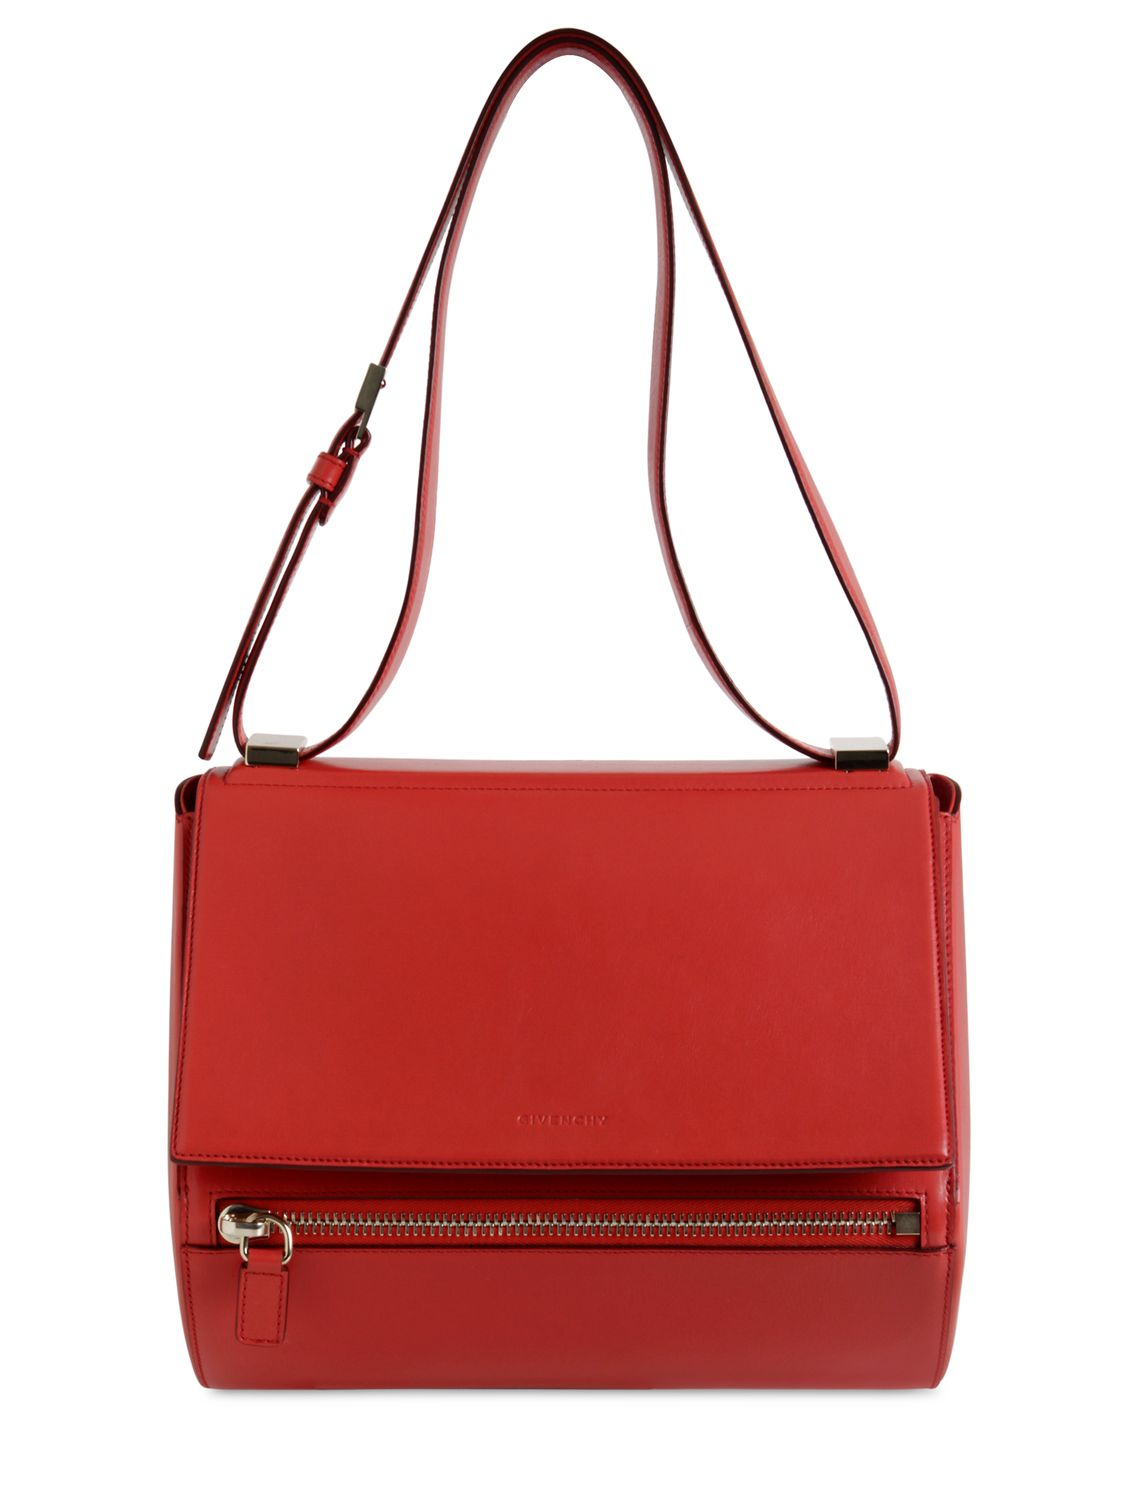 Lyst - Givenchy Pandora Box Textured Leather Bag in Red